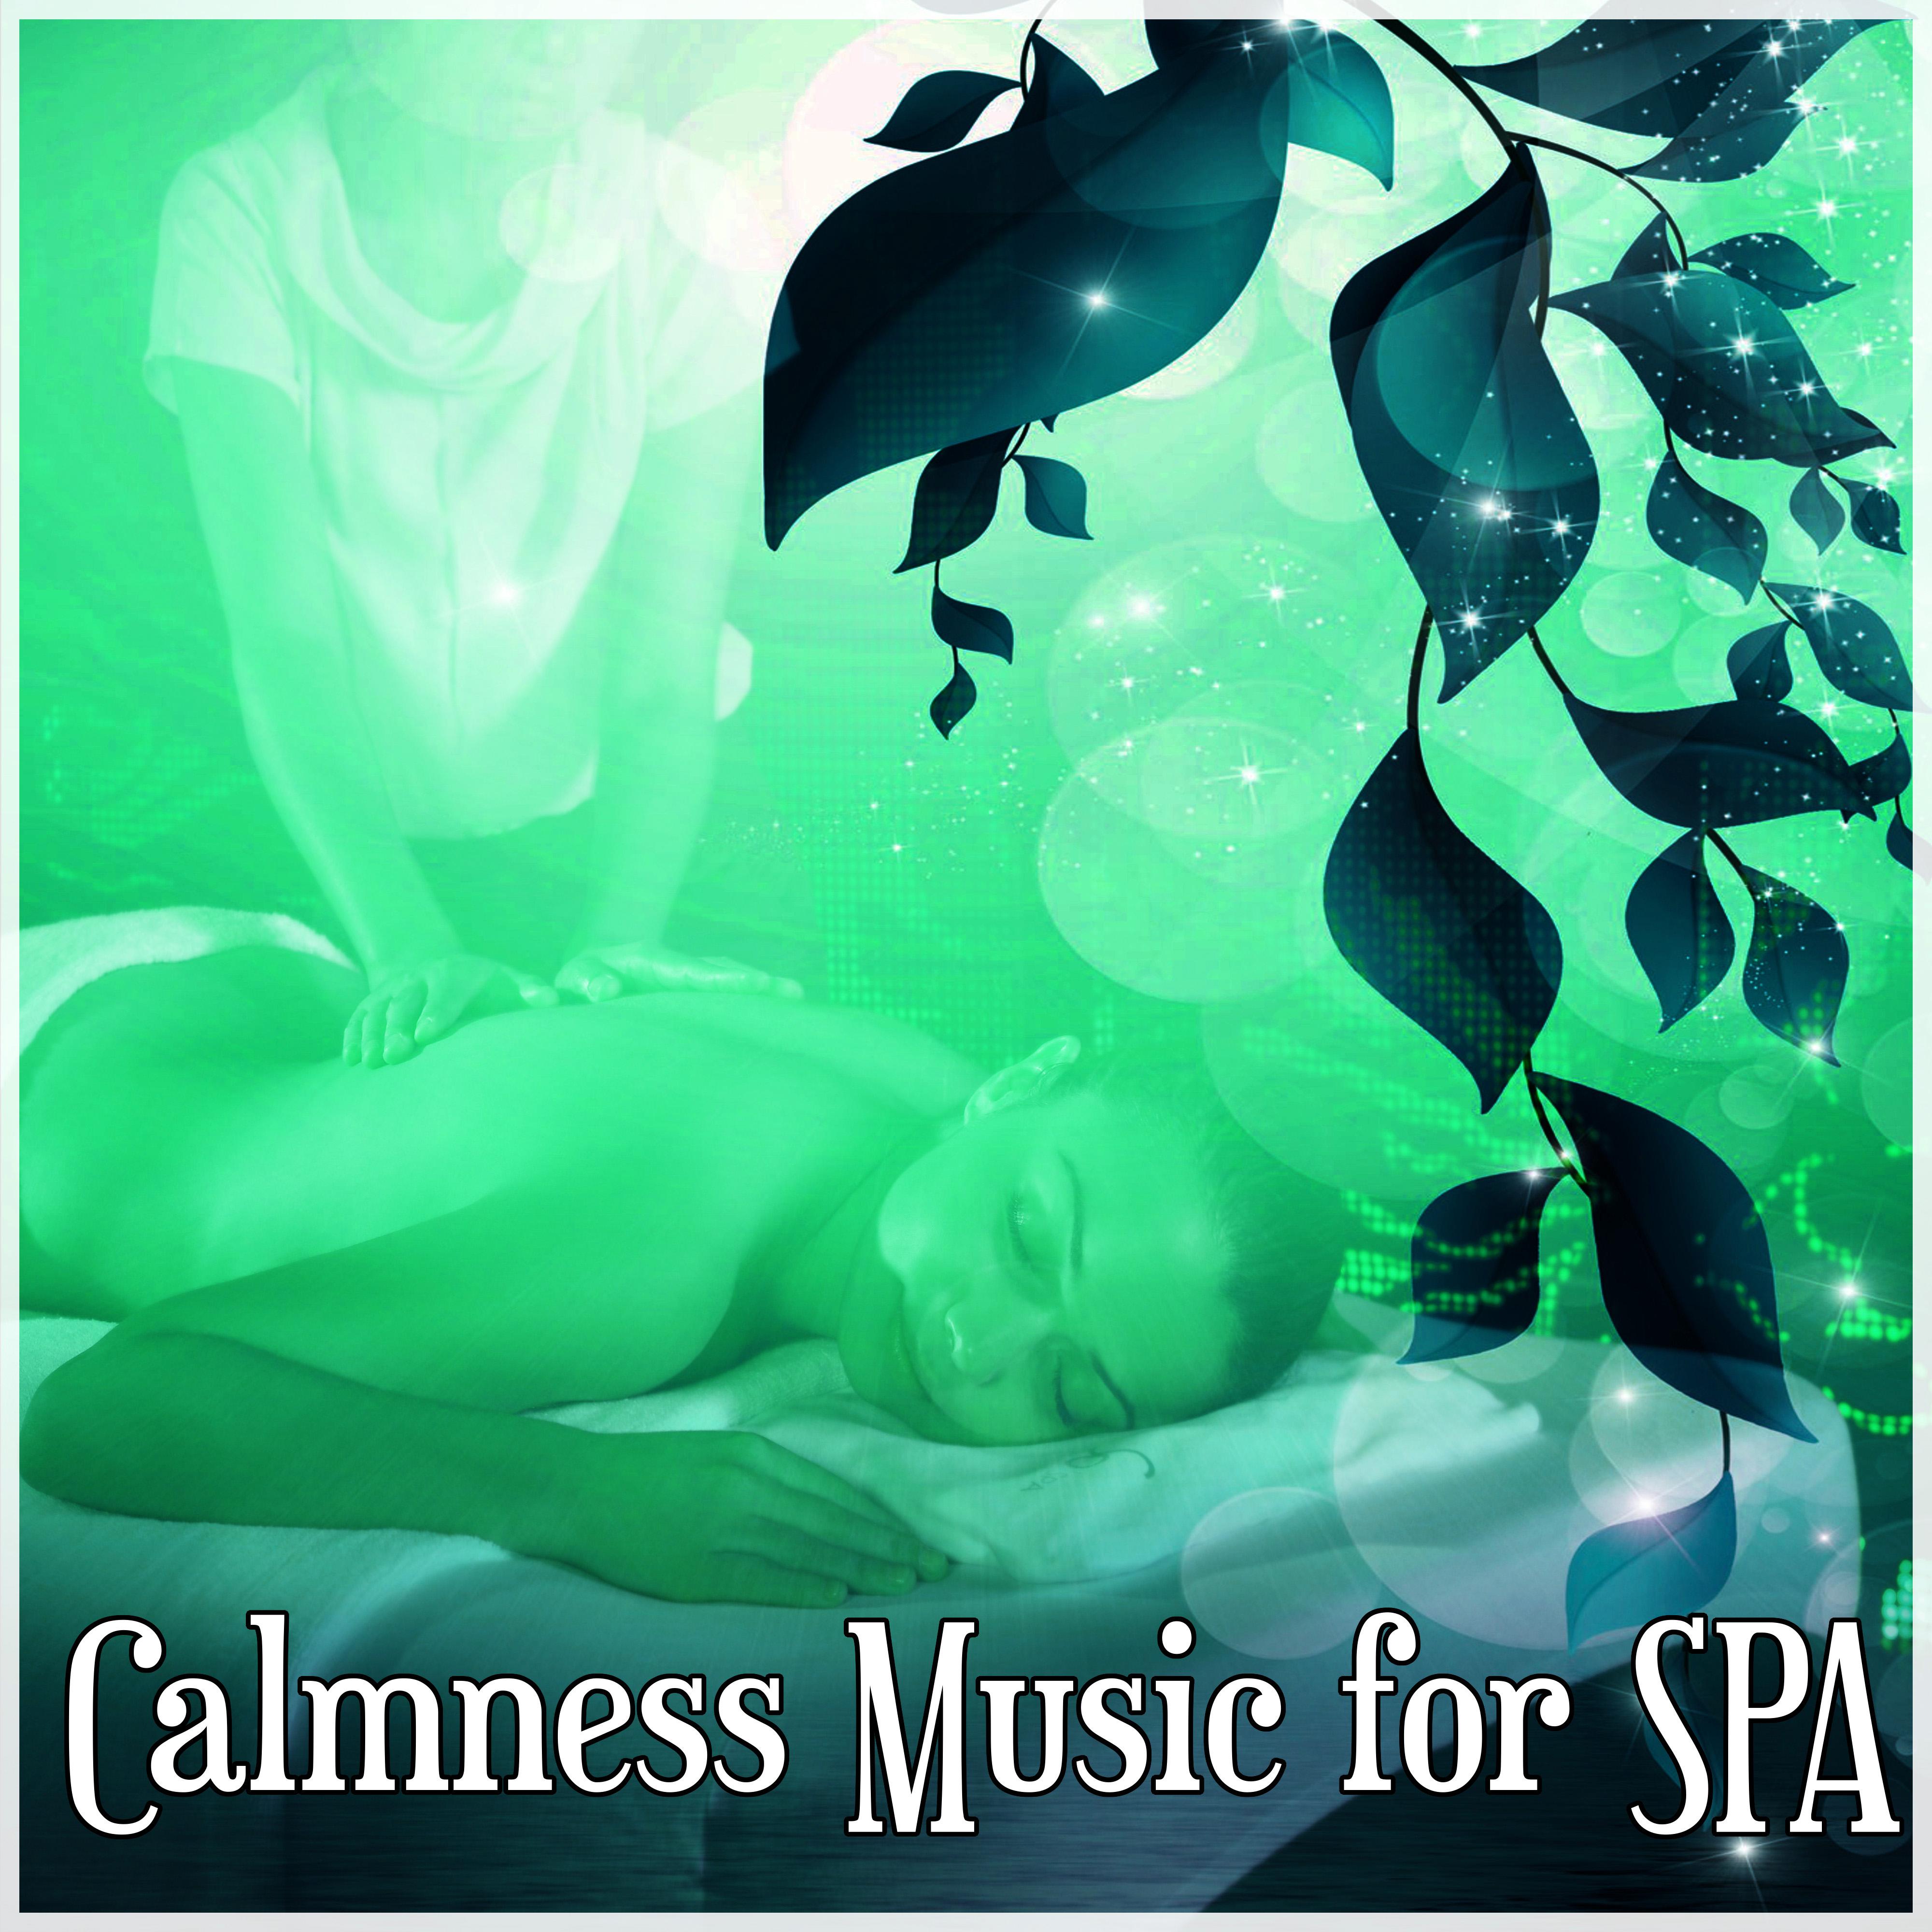 Calmness Music for SPA – New Age Sounds for Total Relaxing while SPA Treatments, Wellness, Bliss Spa